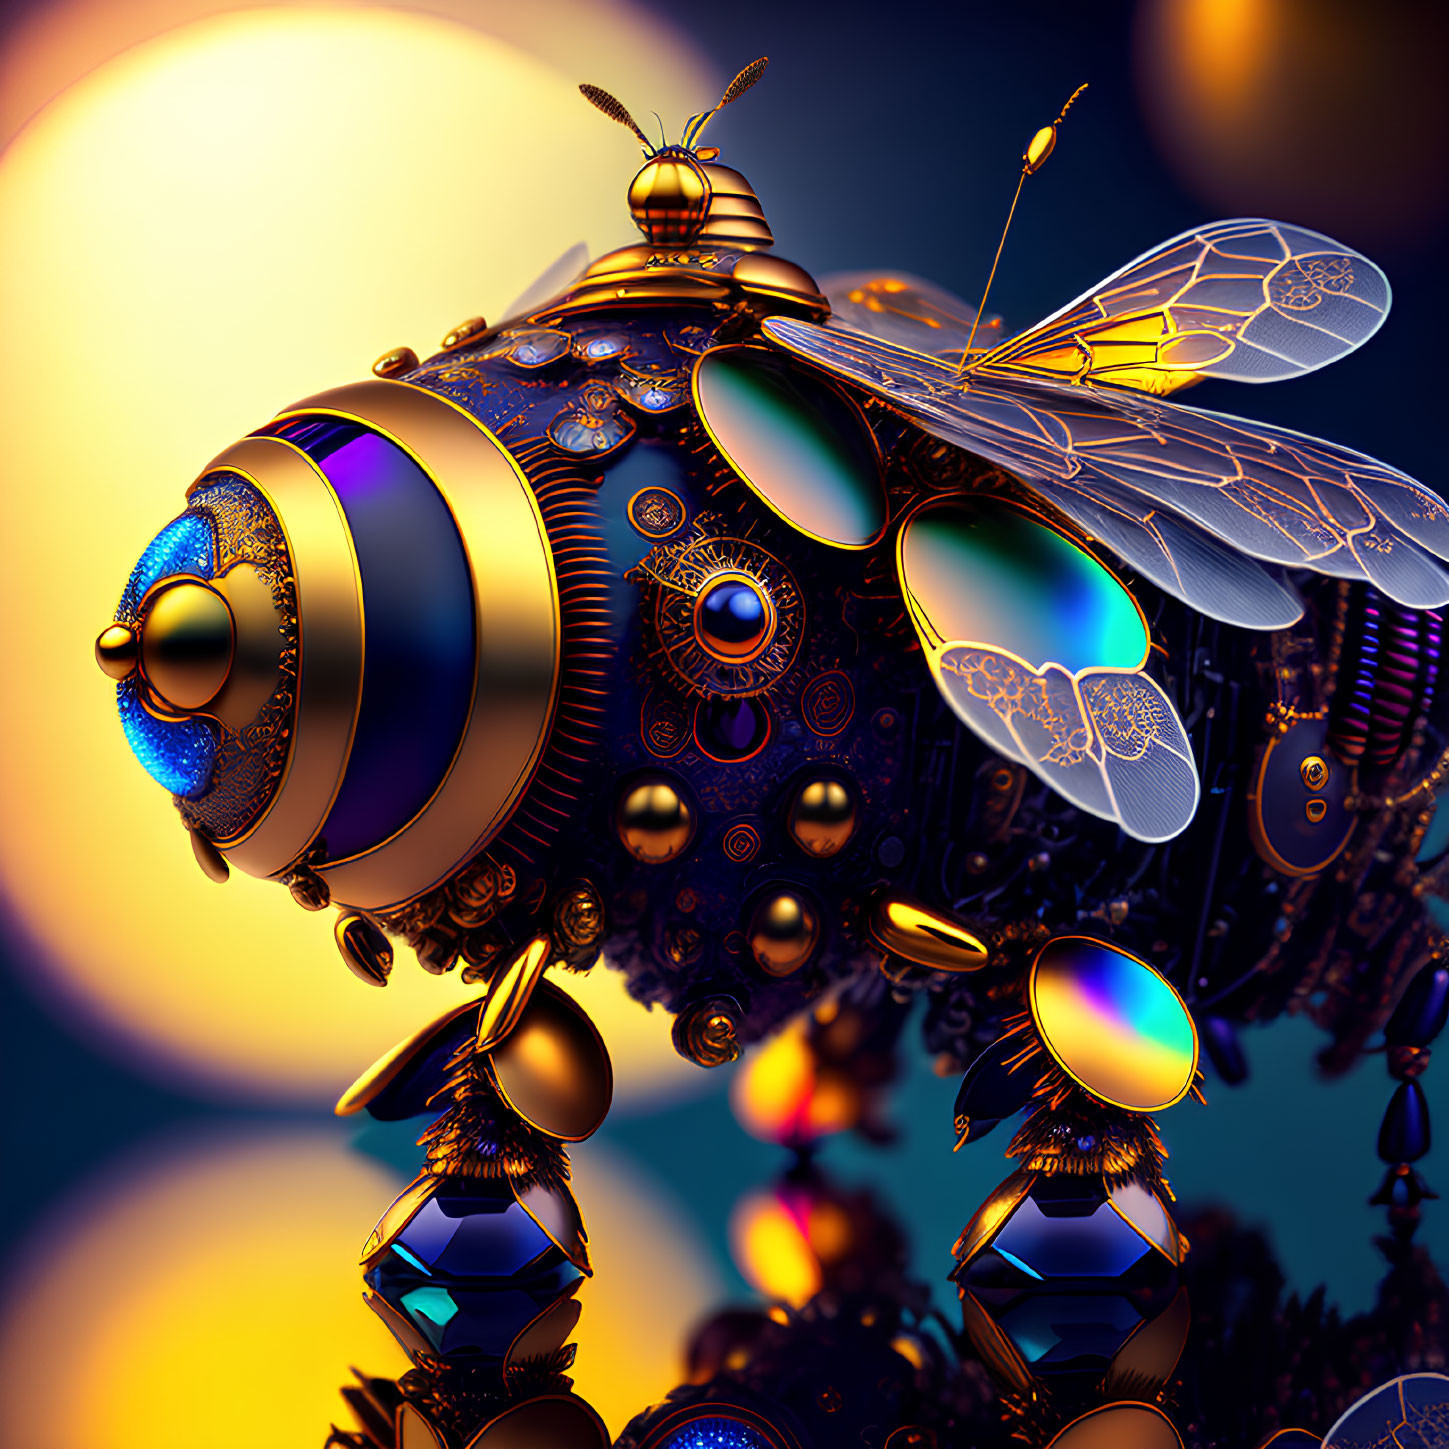 Mechanical bee illustration with intricate gears and jewel-like components on golden sunset backdrop